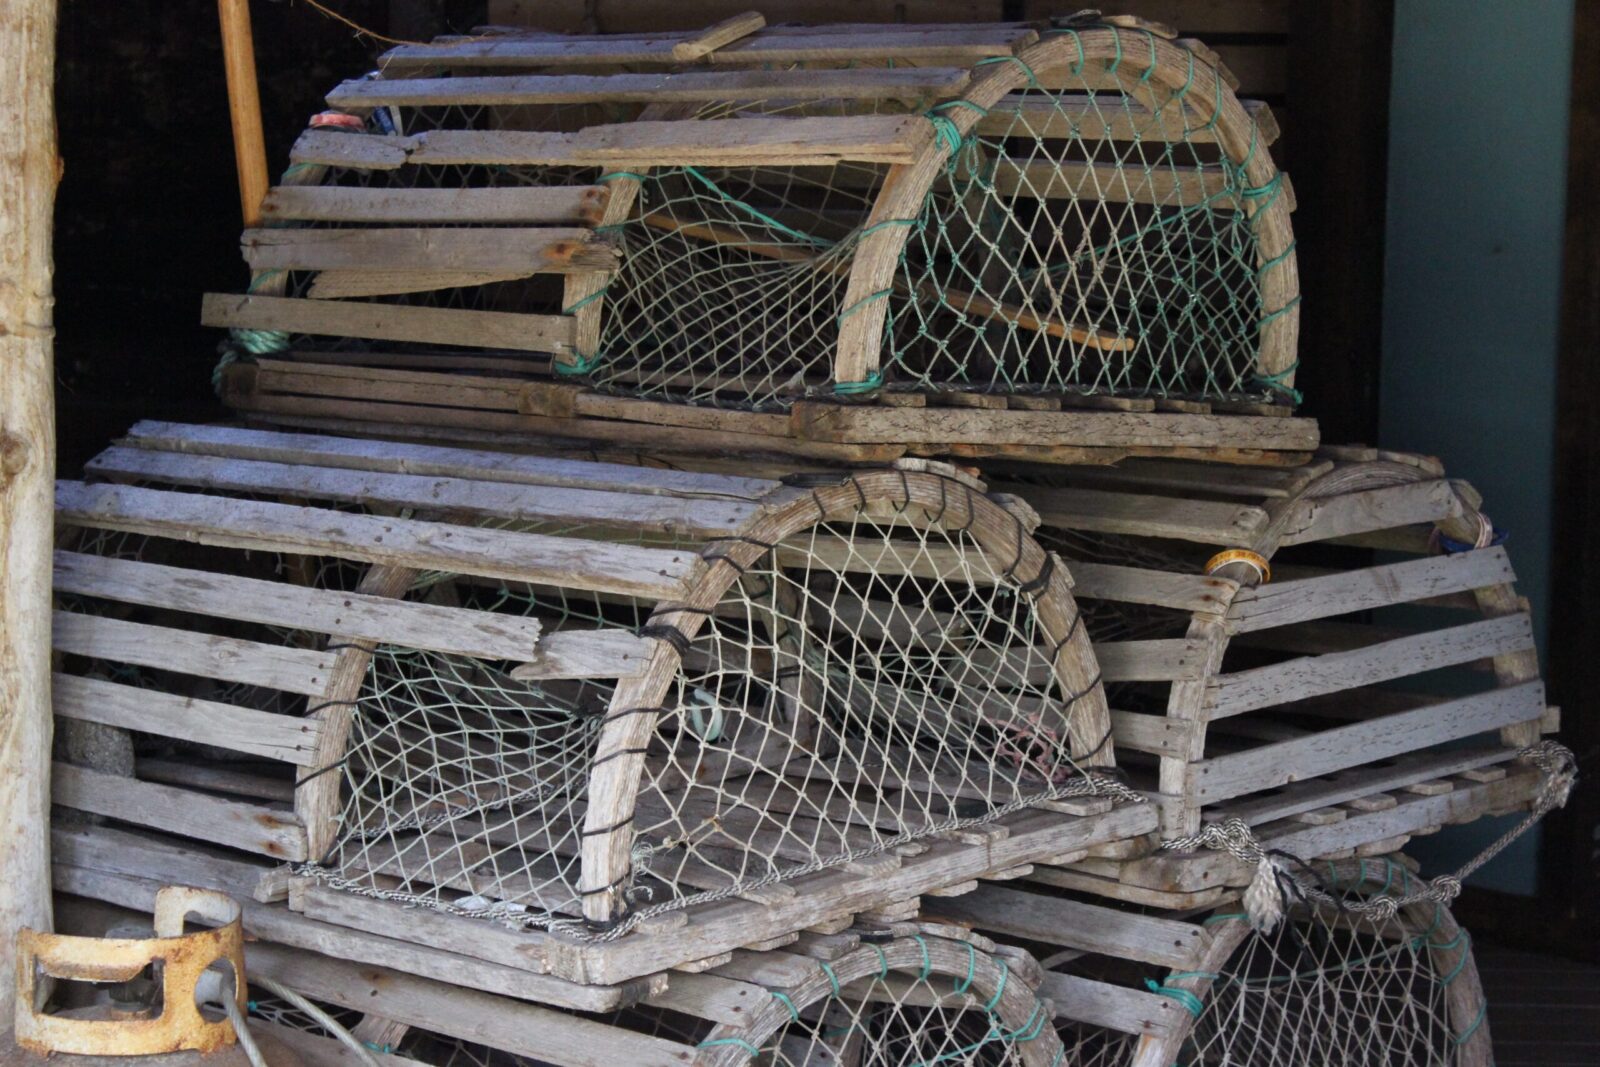 A group of lobster cages sitting on a wooden floor.